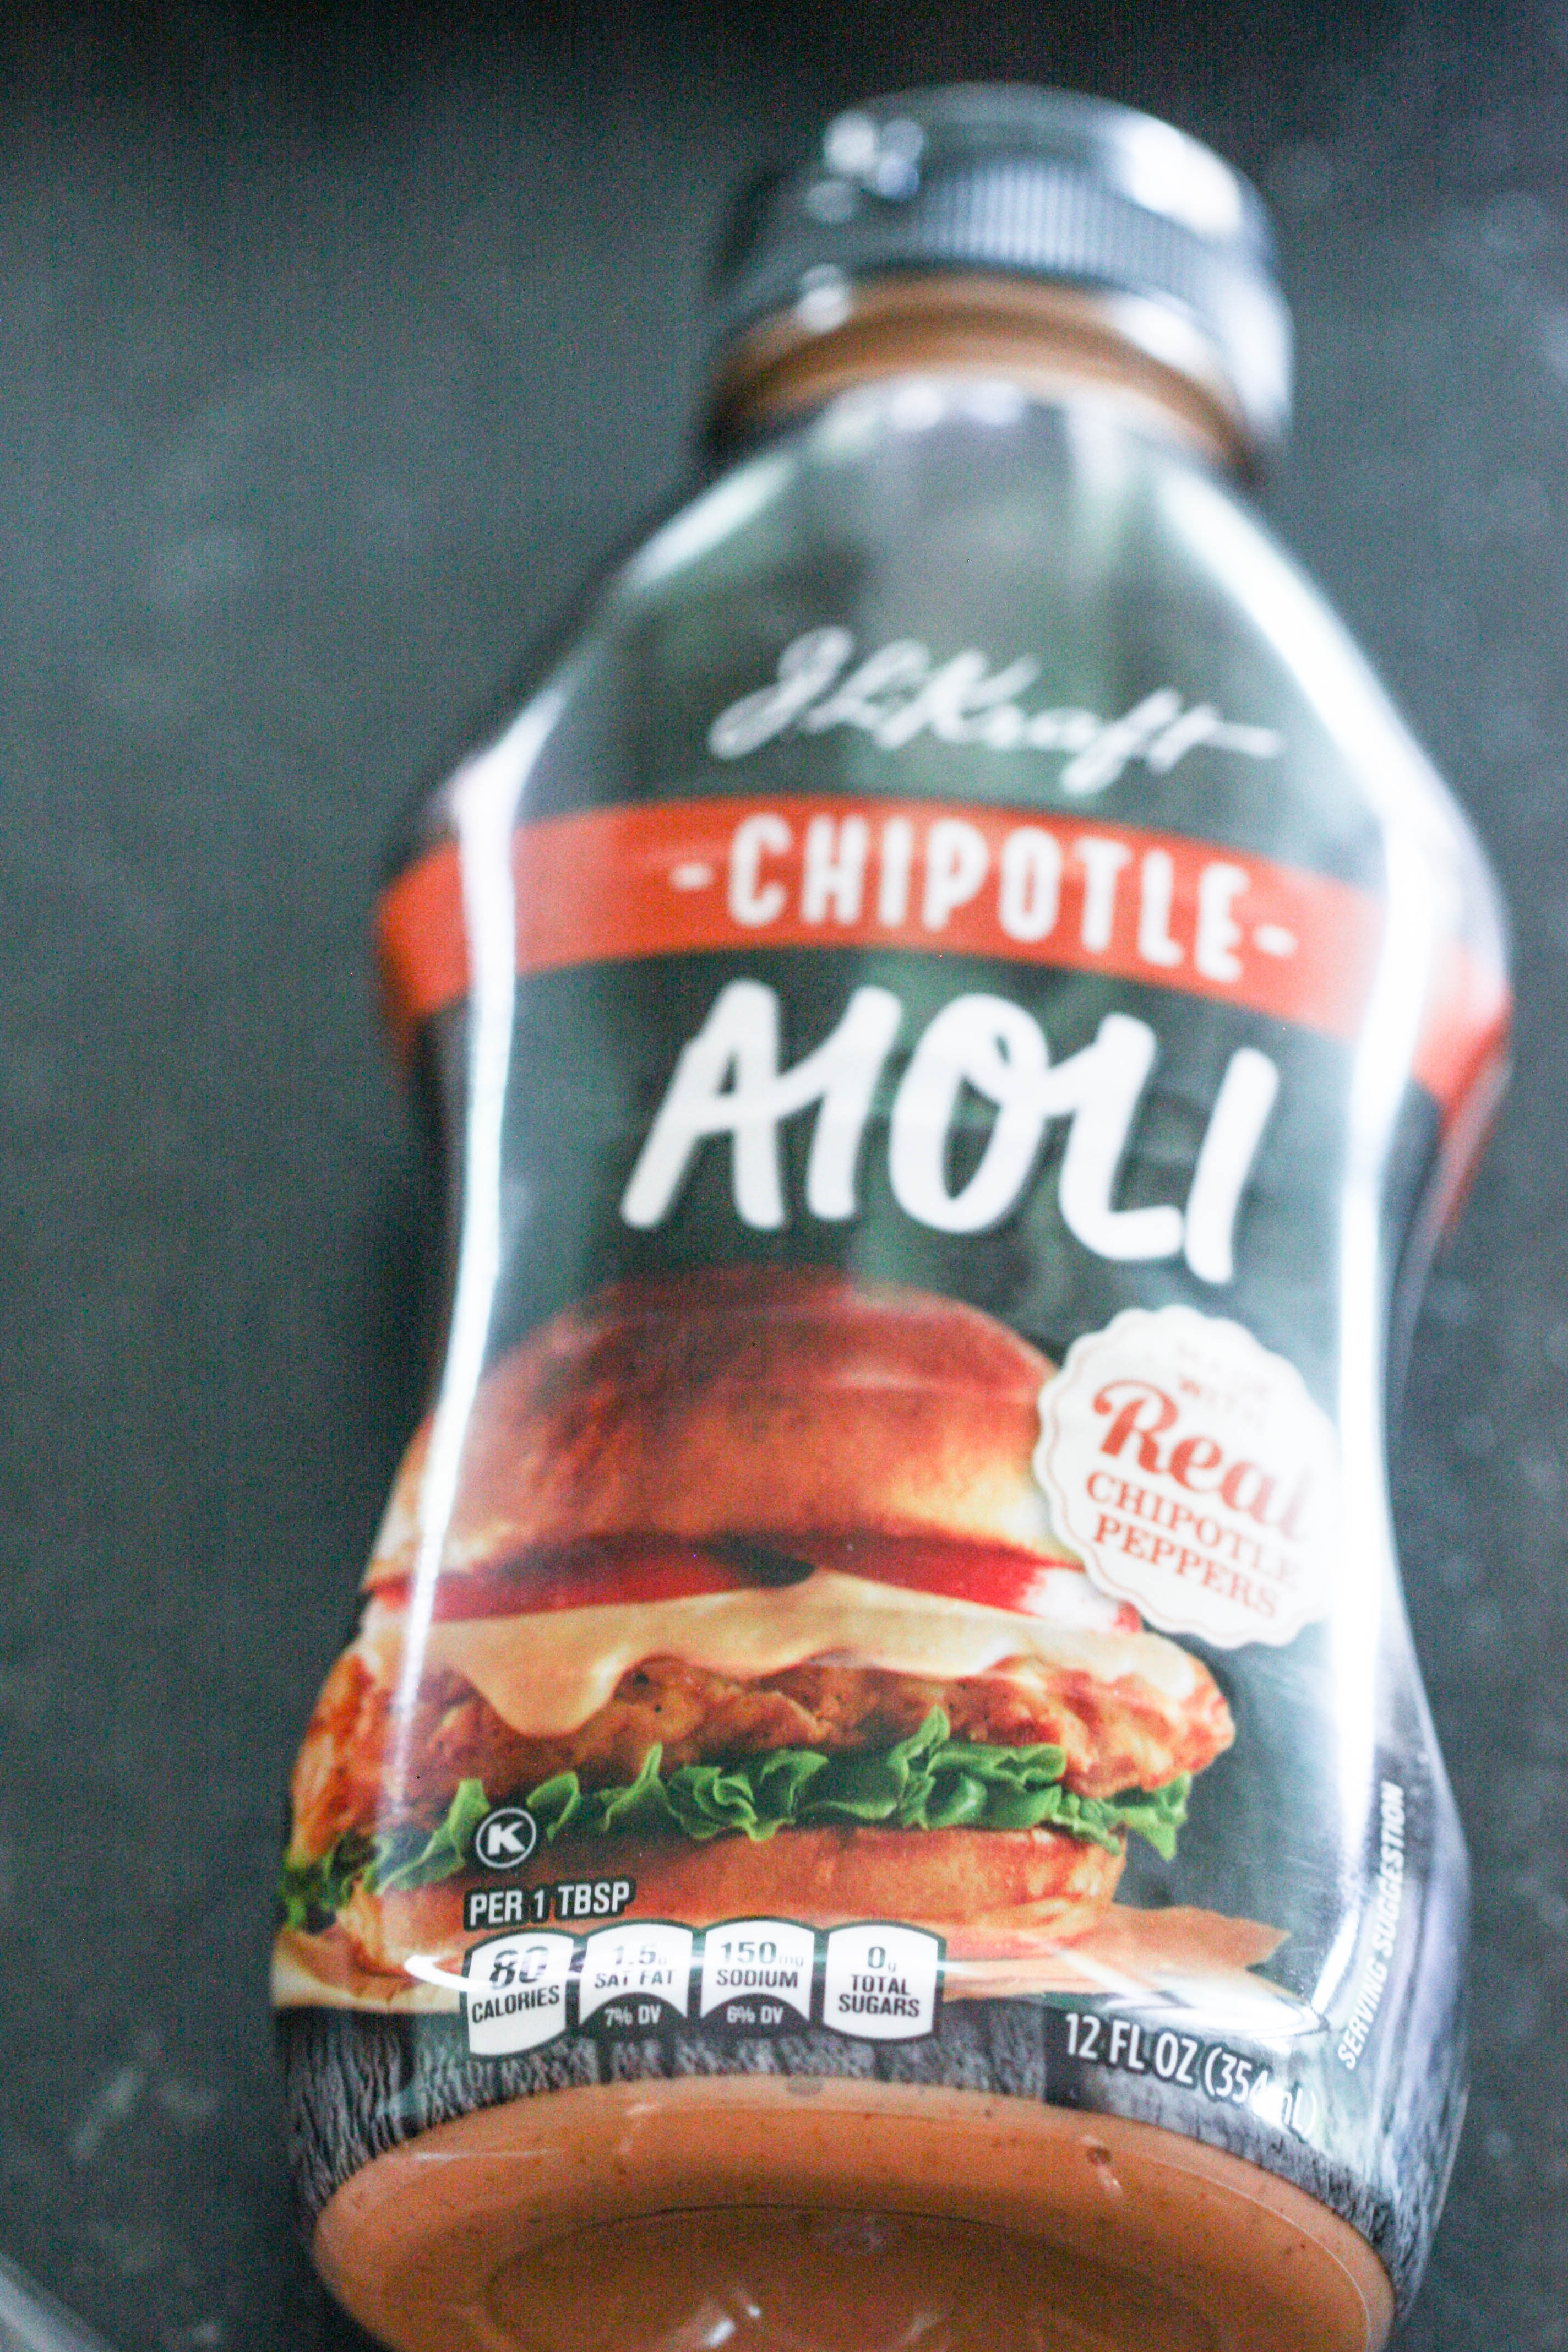 A bottle of Chipotle Aioli Mayo